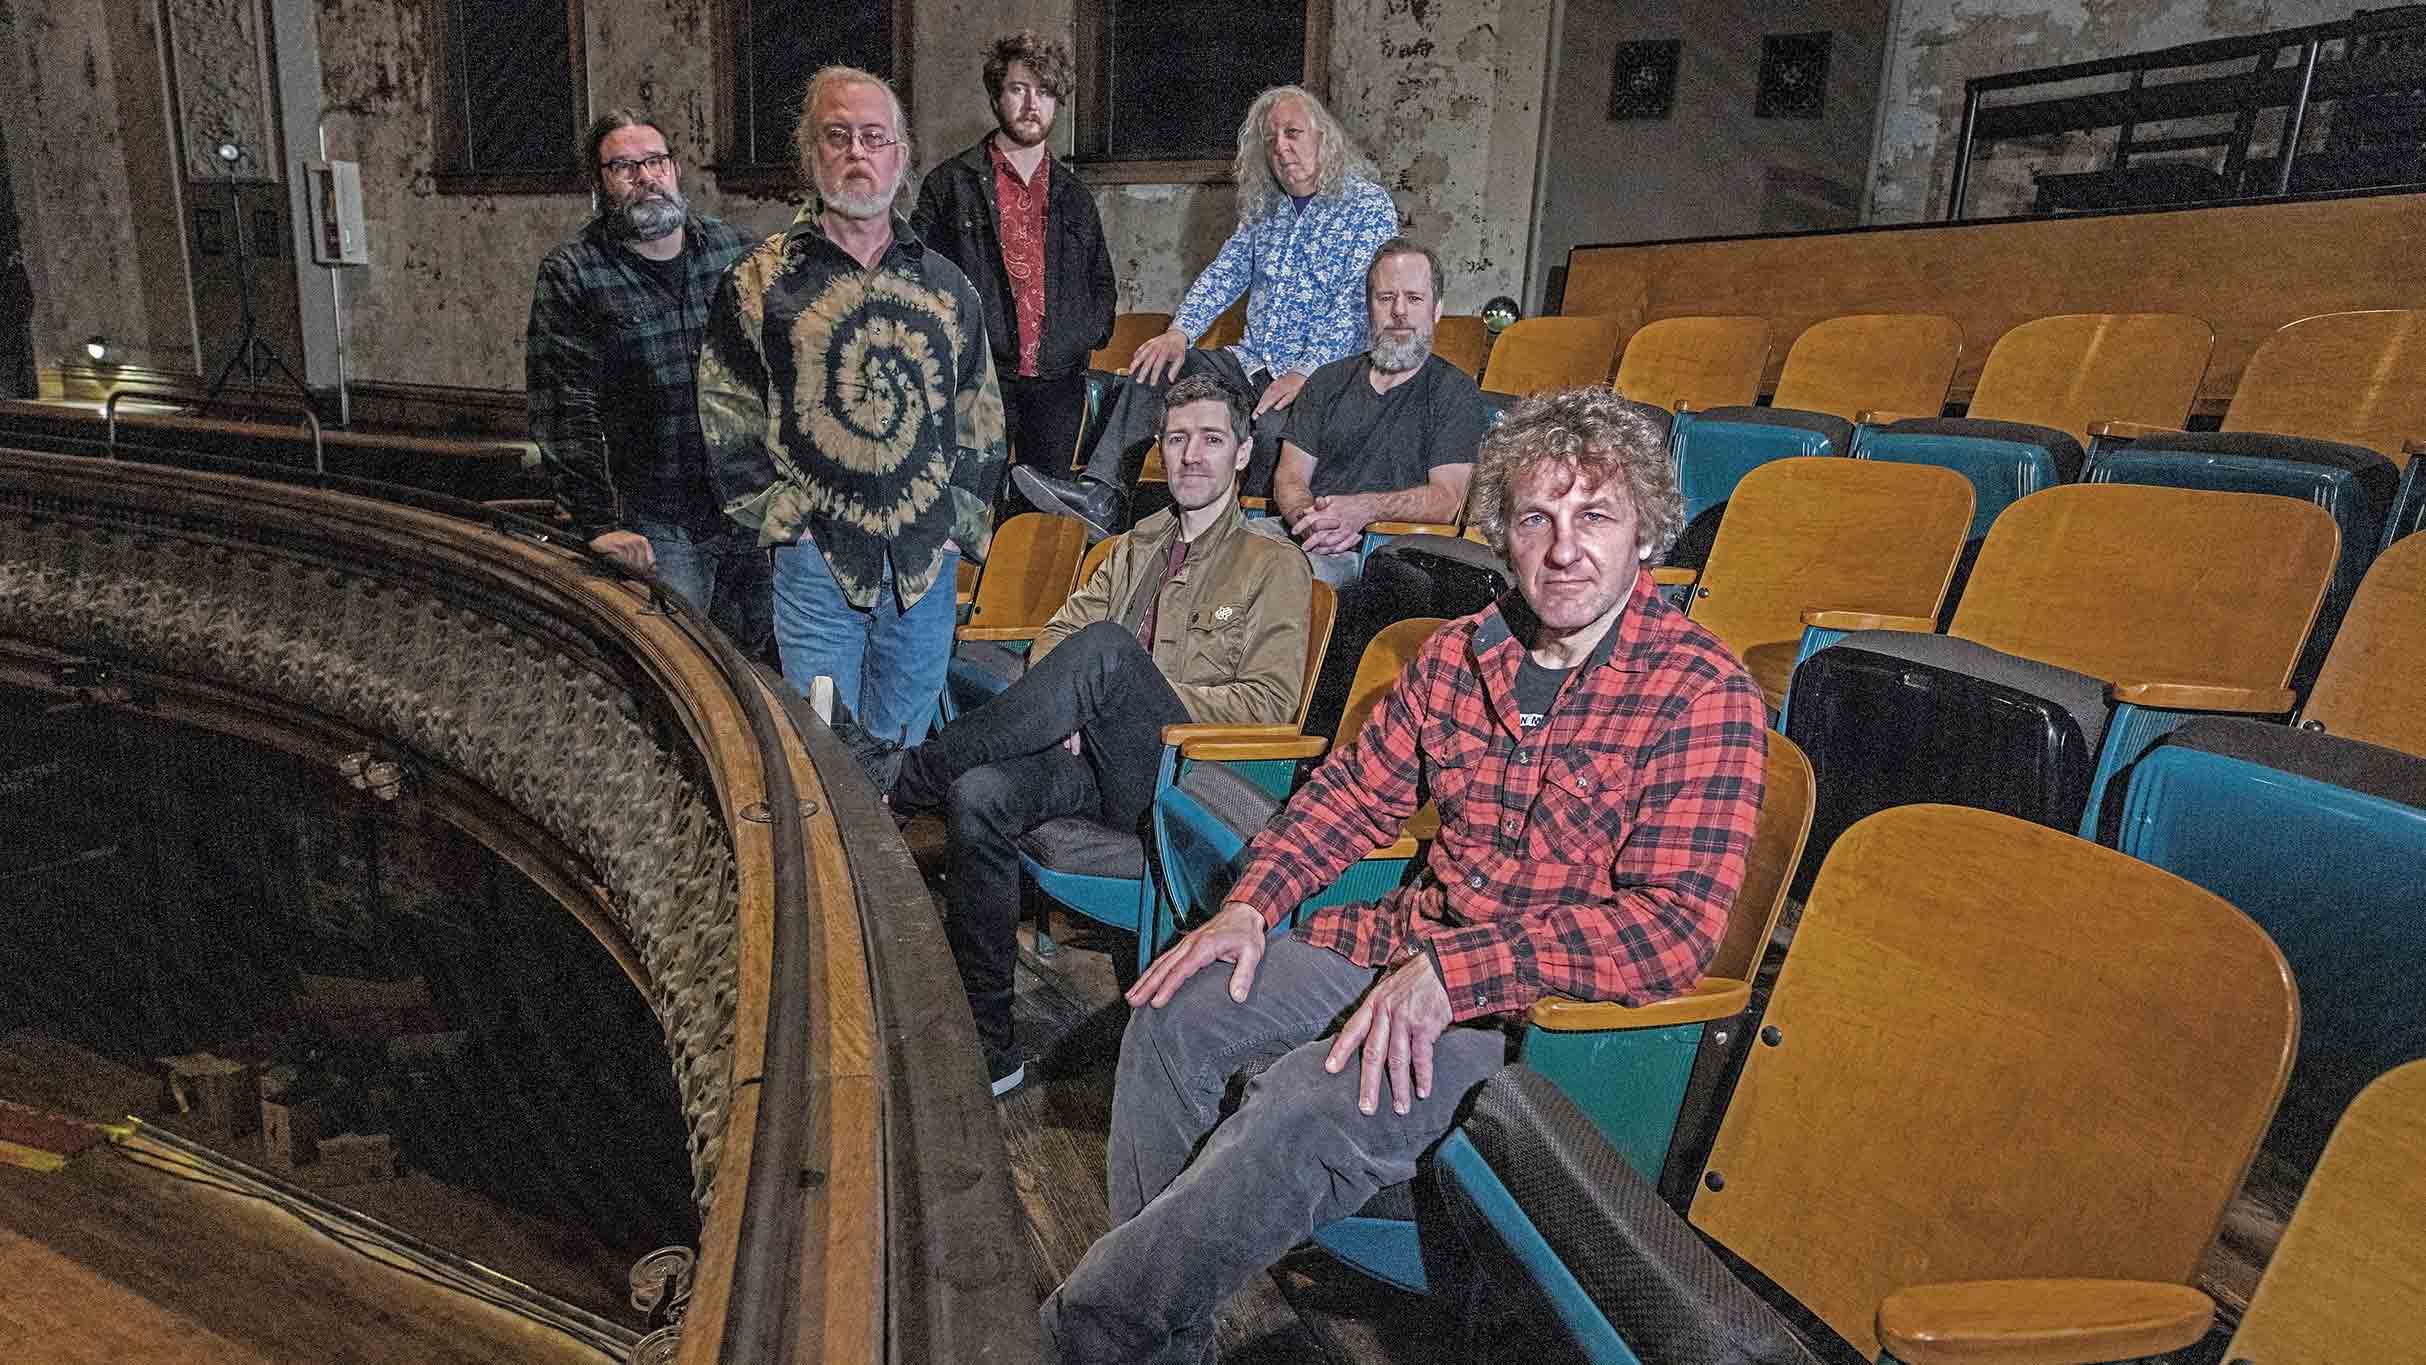 Railroad Earth pre-sale password for early tickets in Wilmington